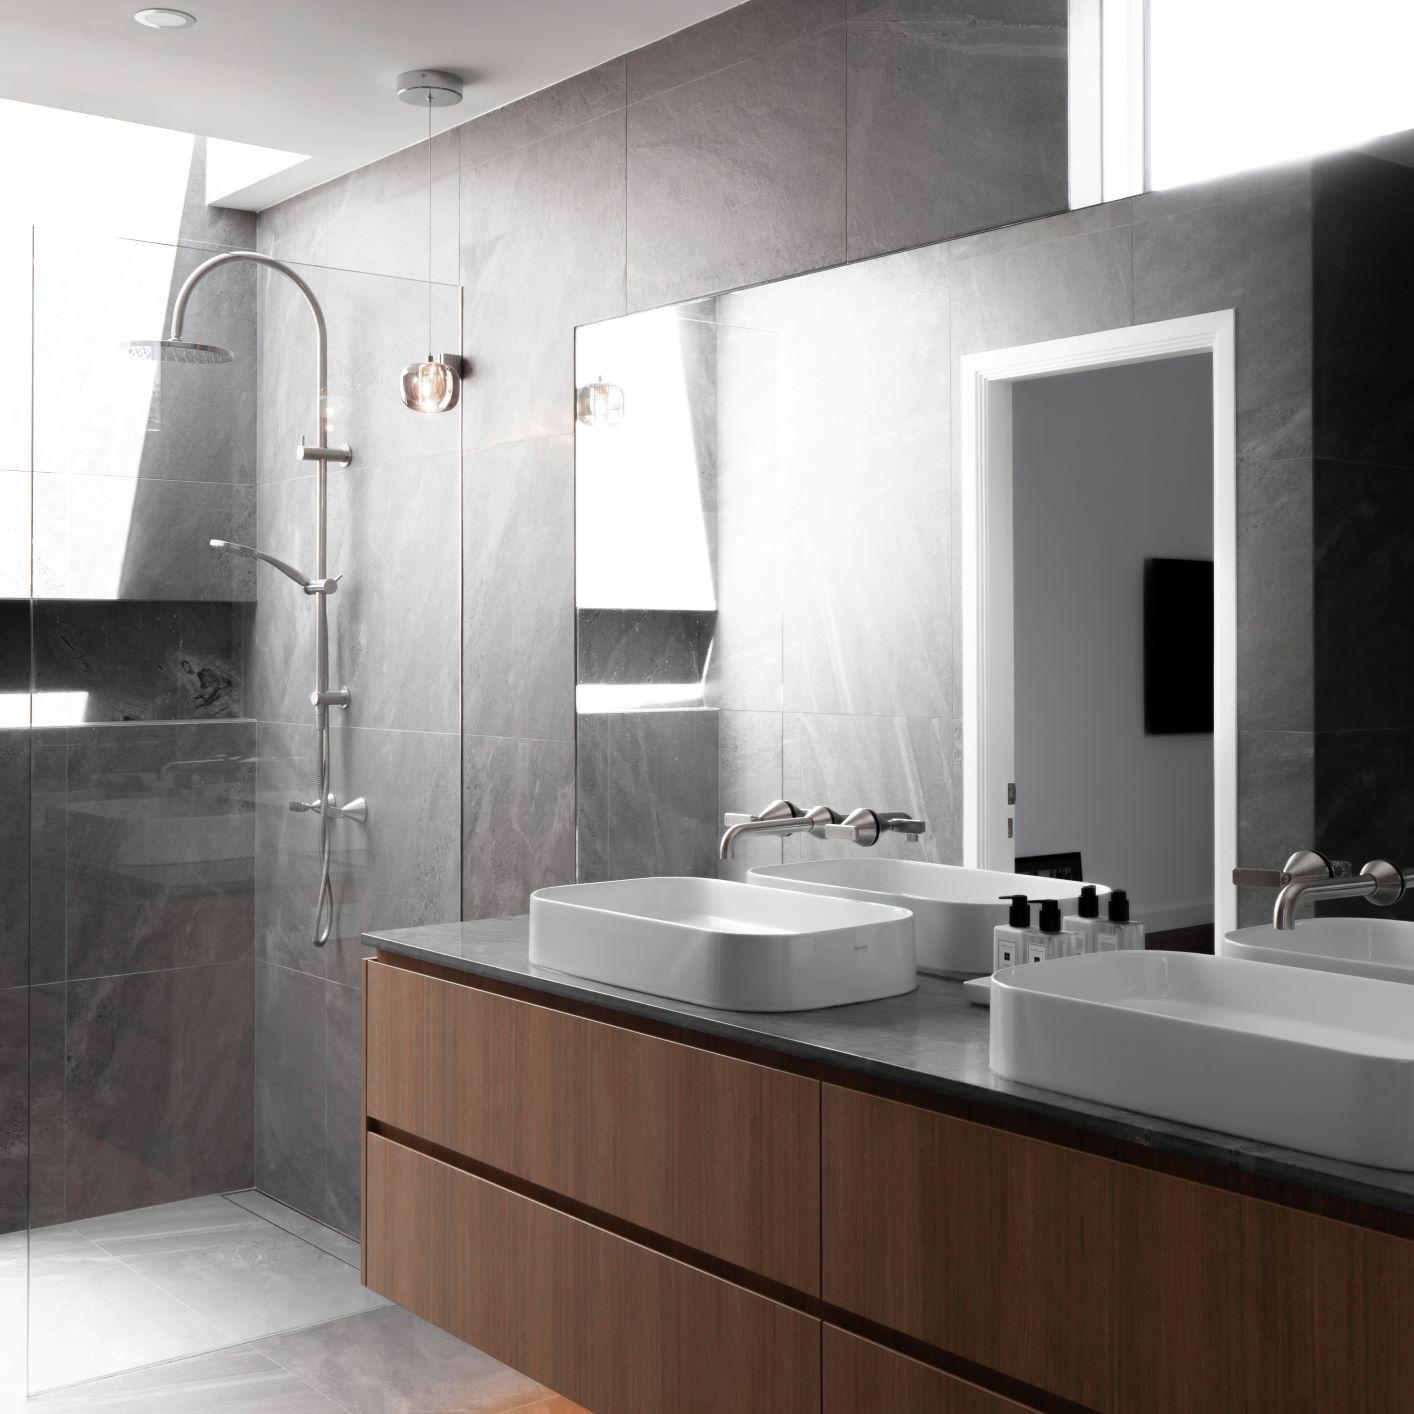 Grey concrete tiles finishes in bathroom